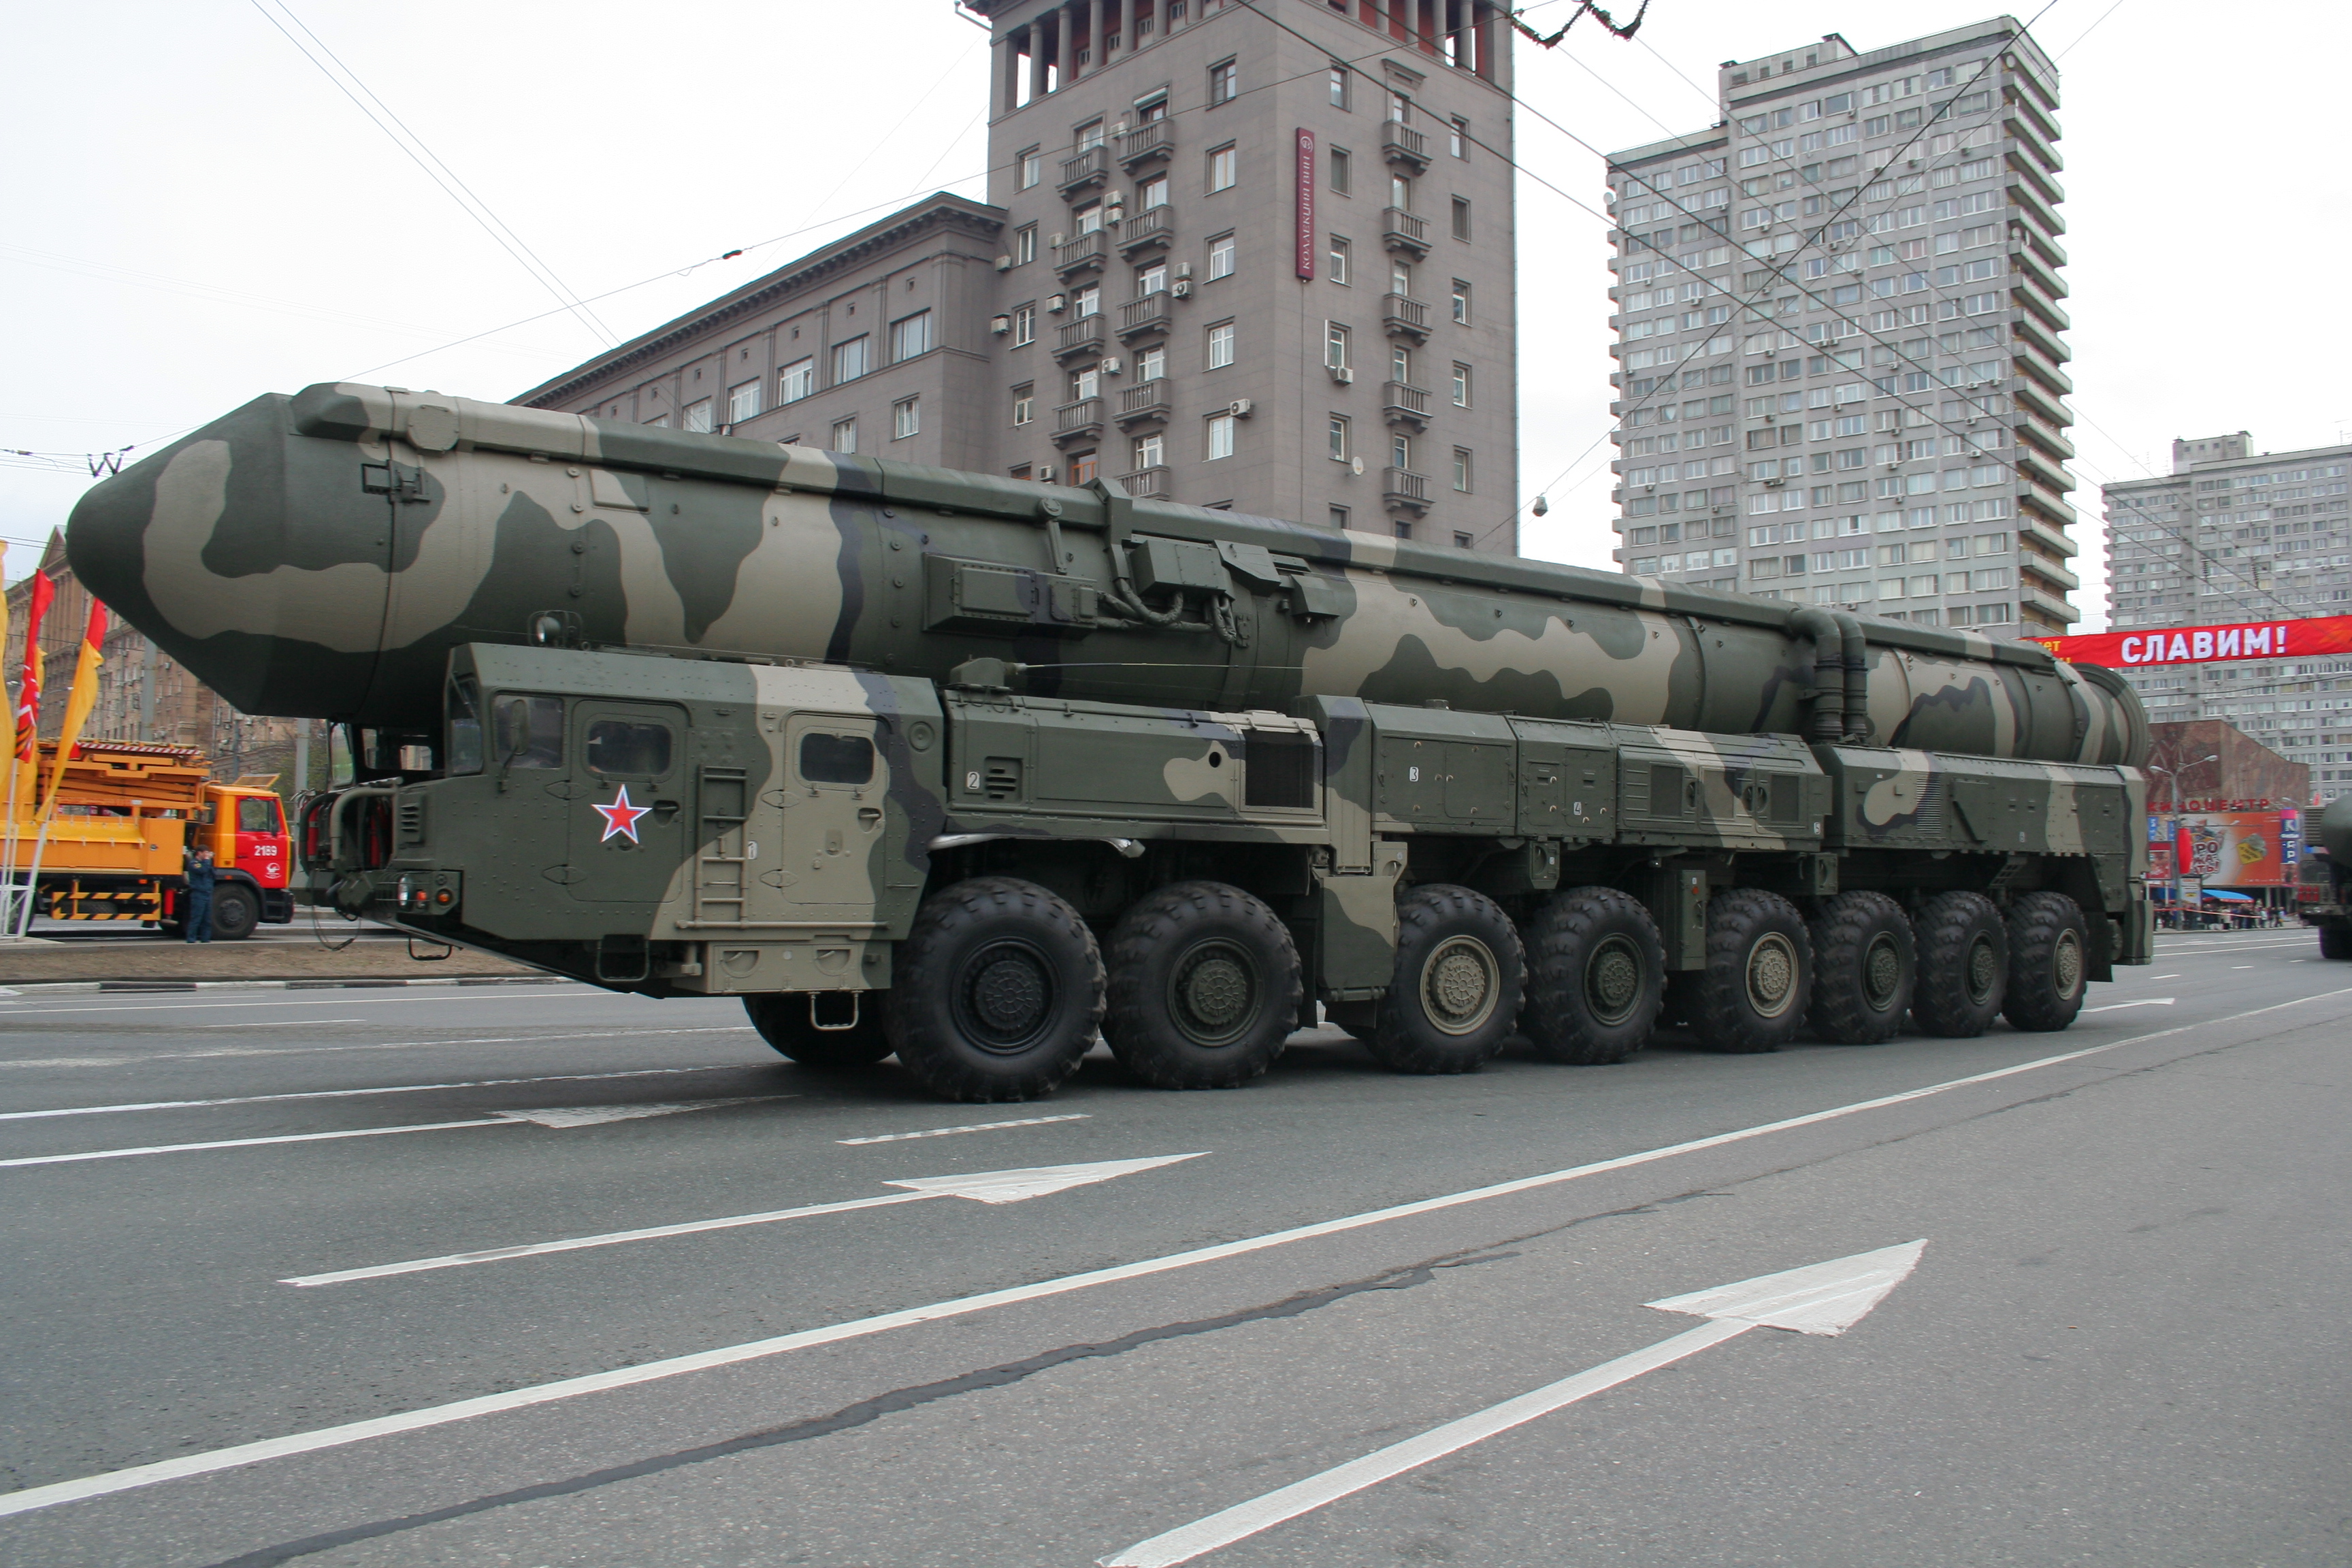 File:Moscow Victory Parade 2010 - Training on May 6 - img08.jpg - Wikimedia  Commons